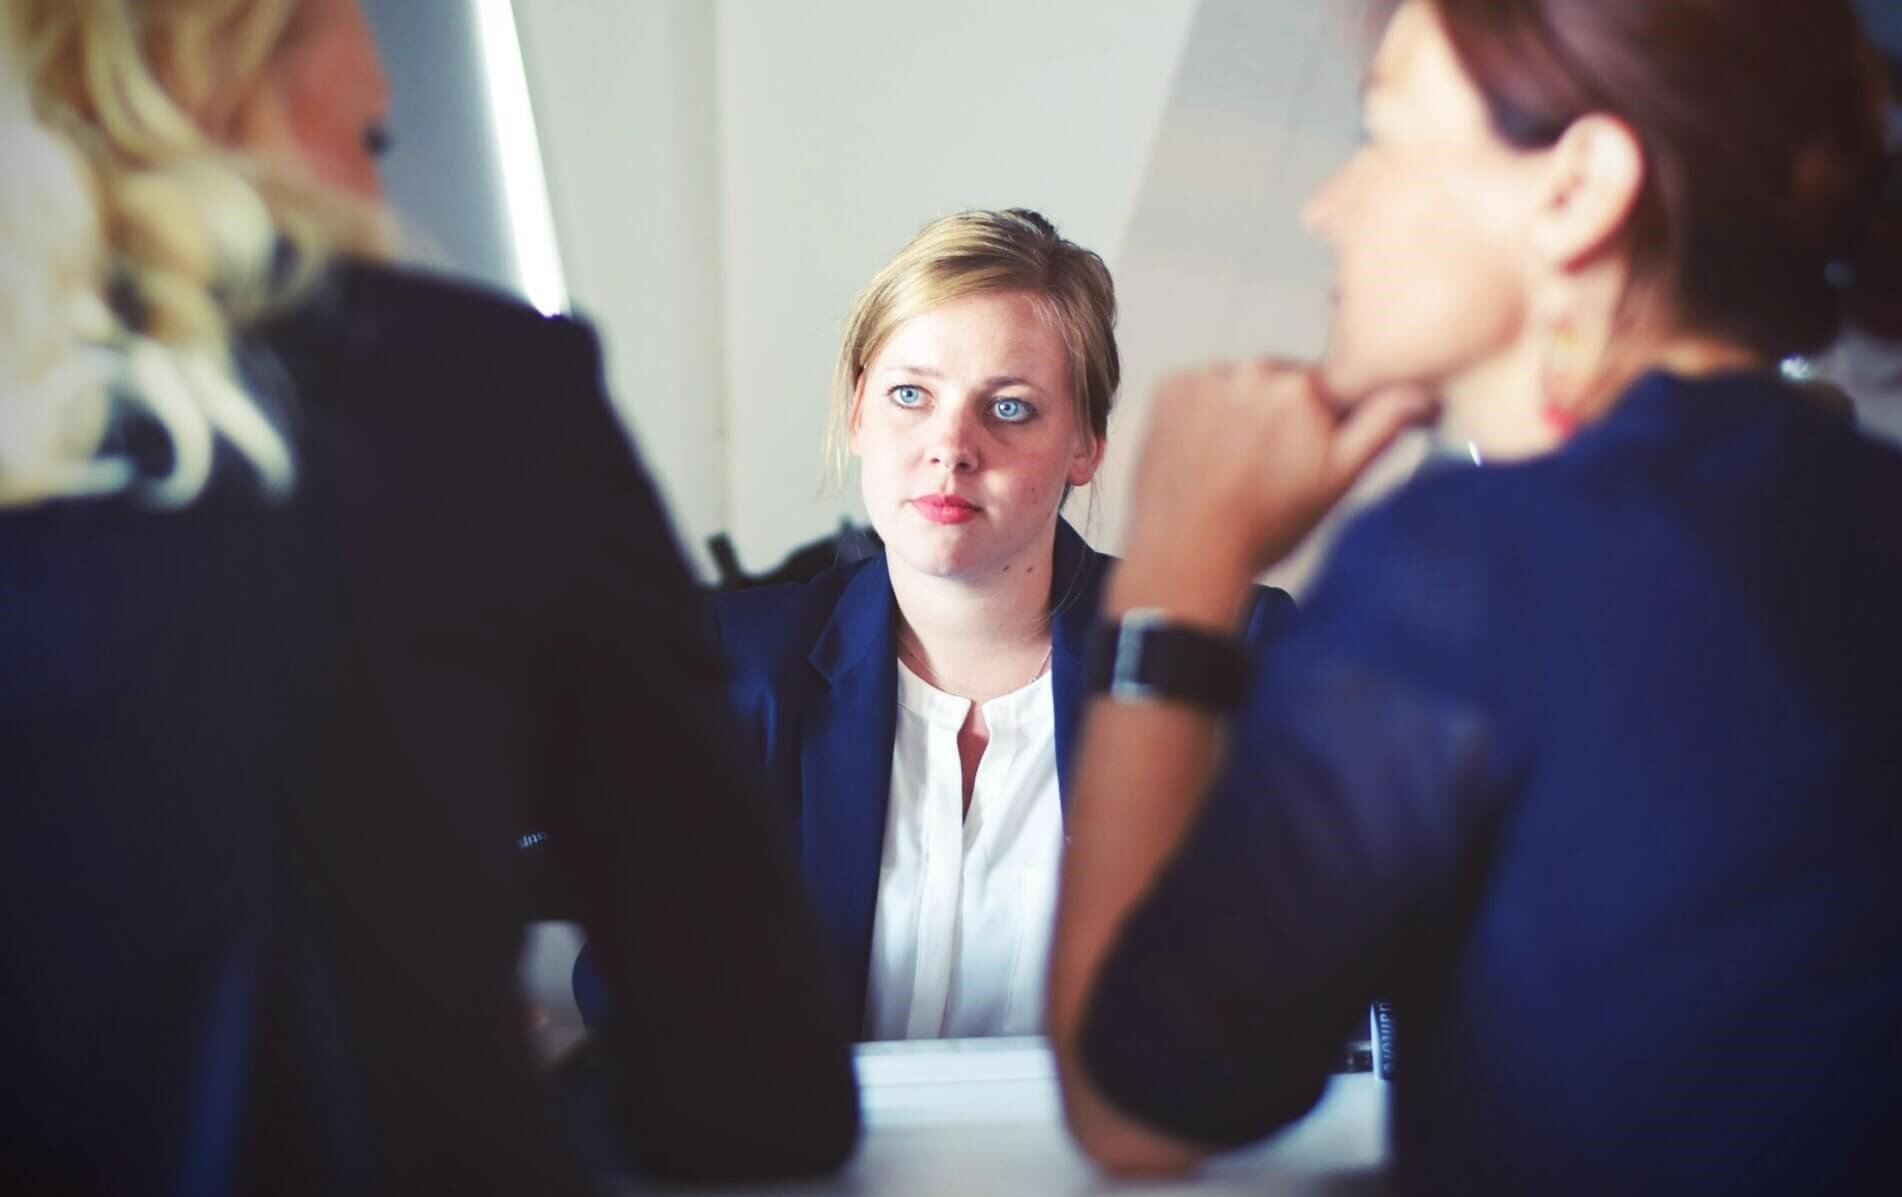 Job Interview Etiquette: 8 Tips to Impress Employers